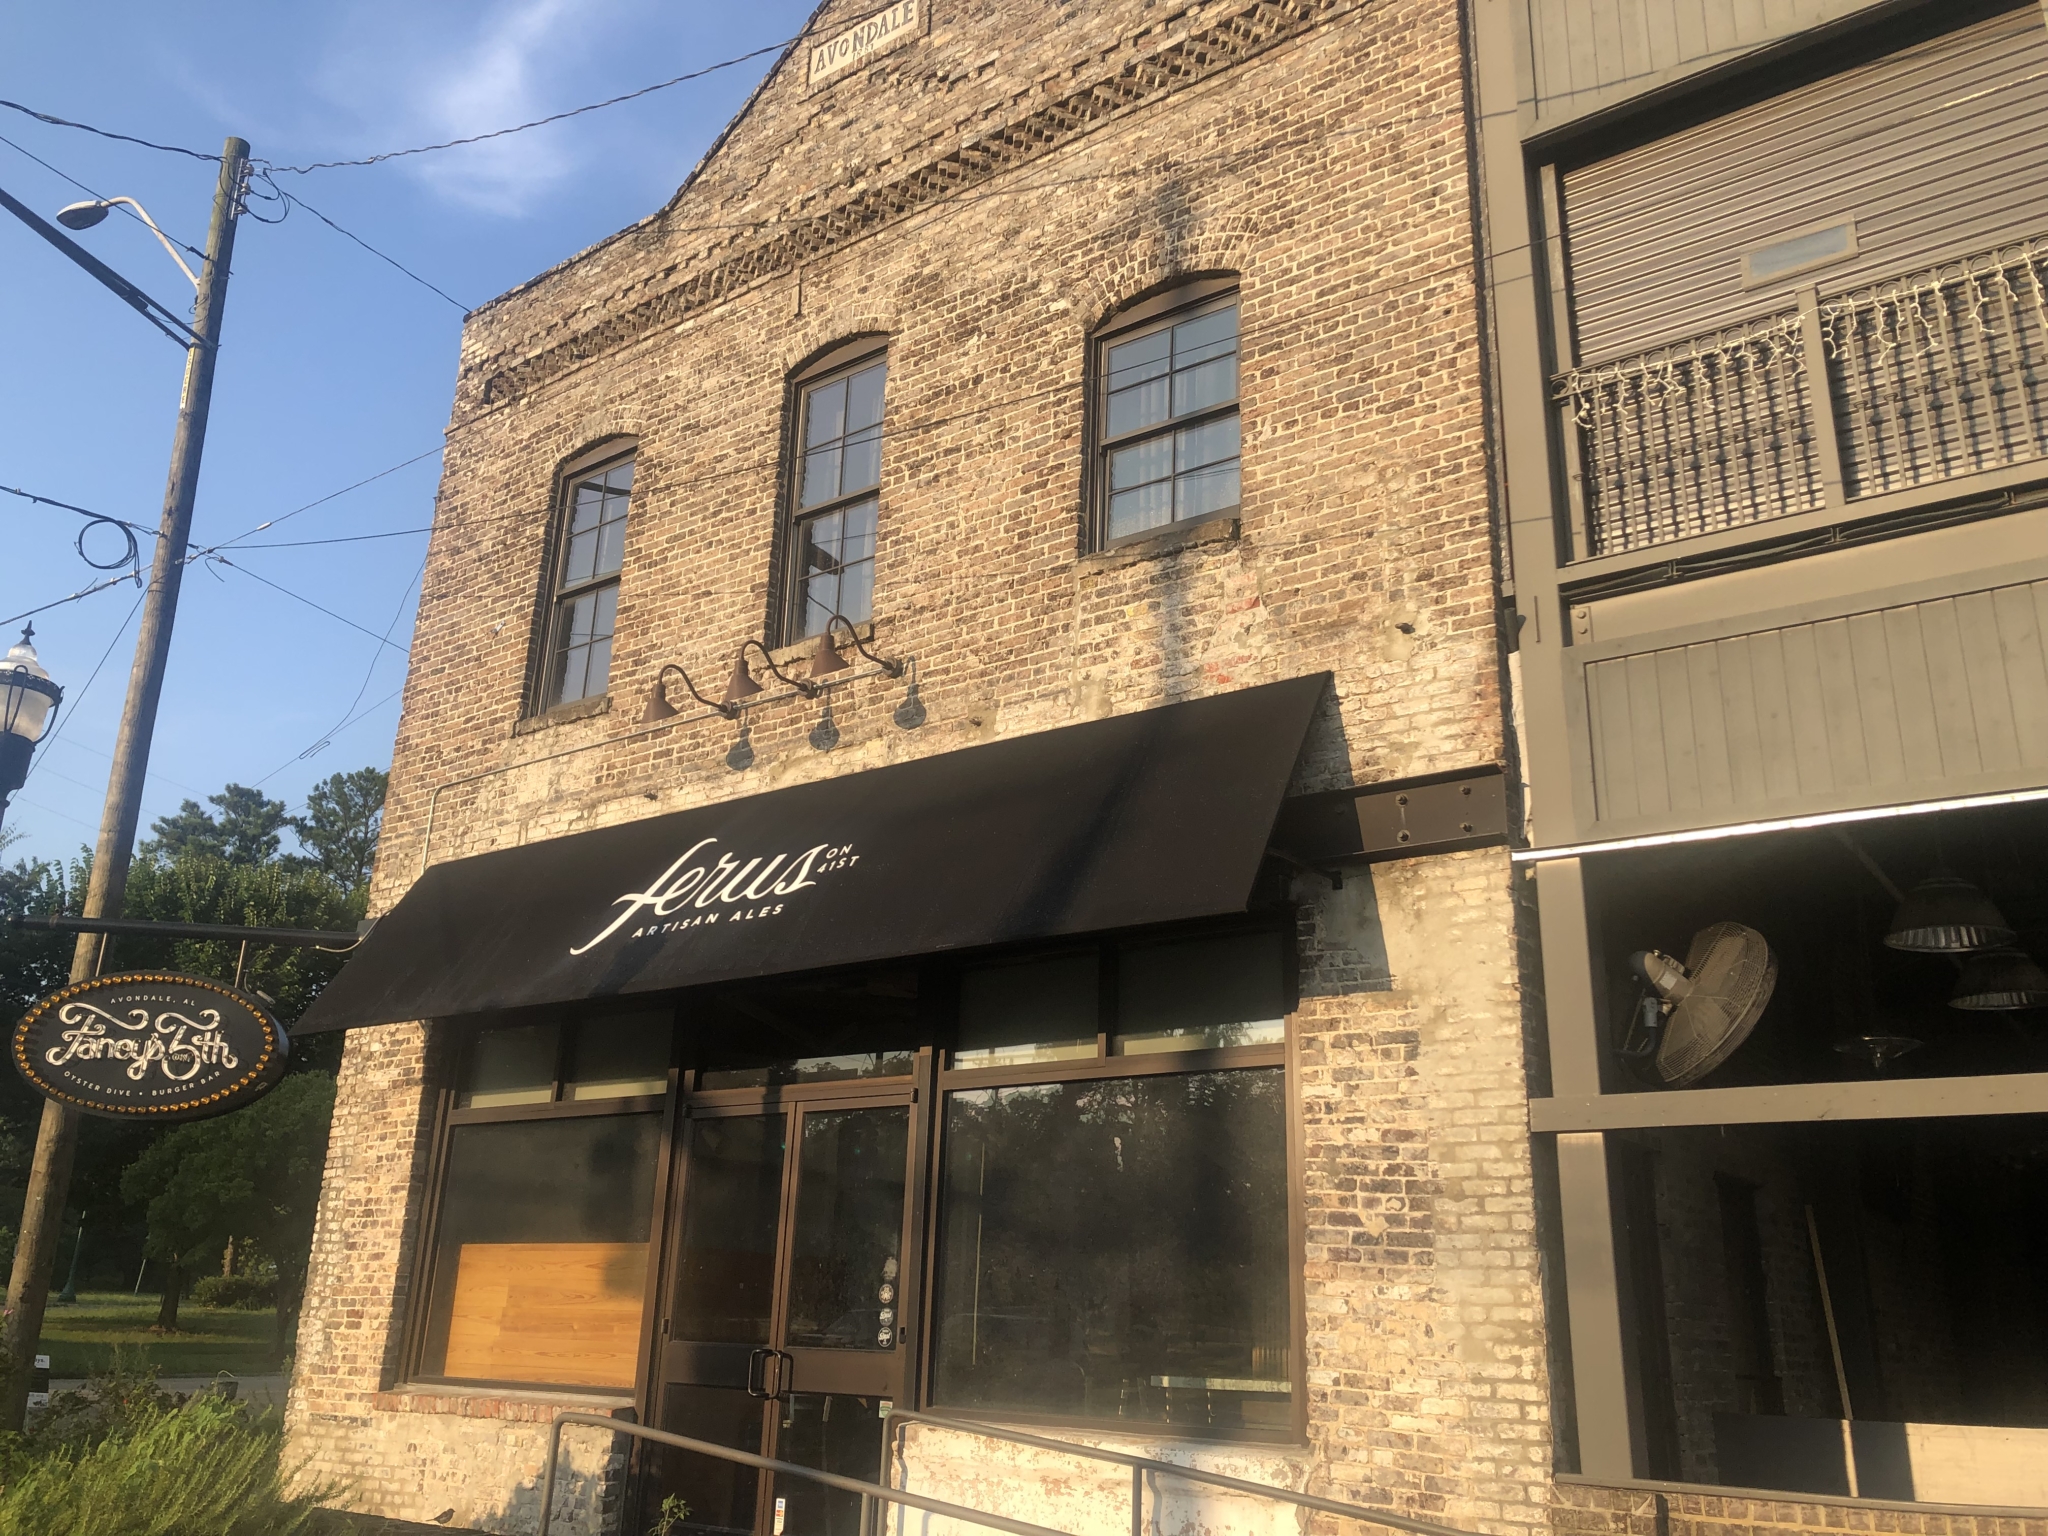 Ferus on 41st, Juniper in Forest Park & others approved for Birmingham liquor licenses